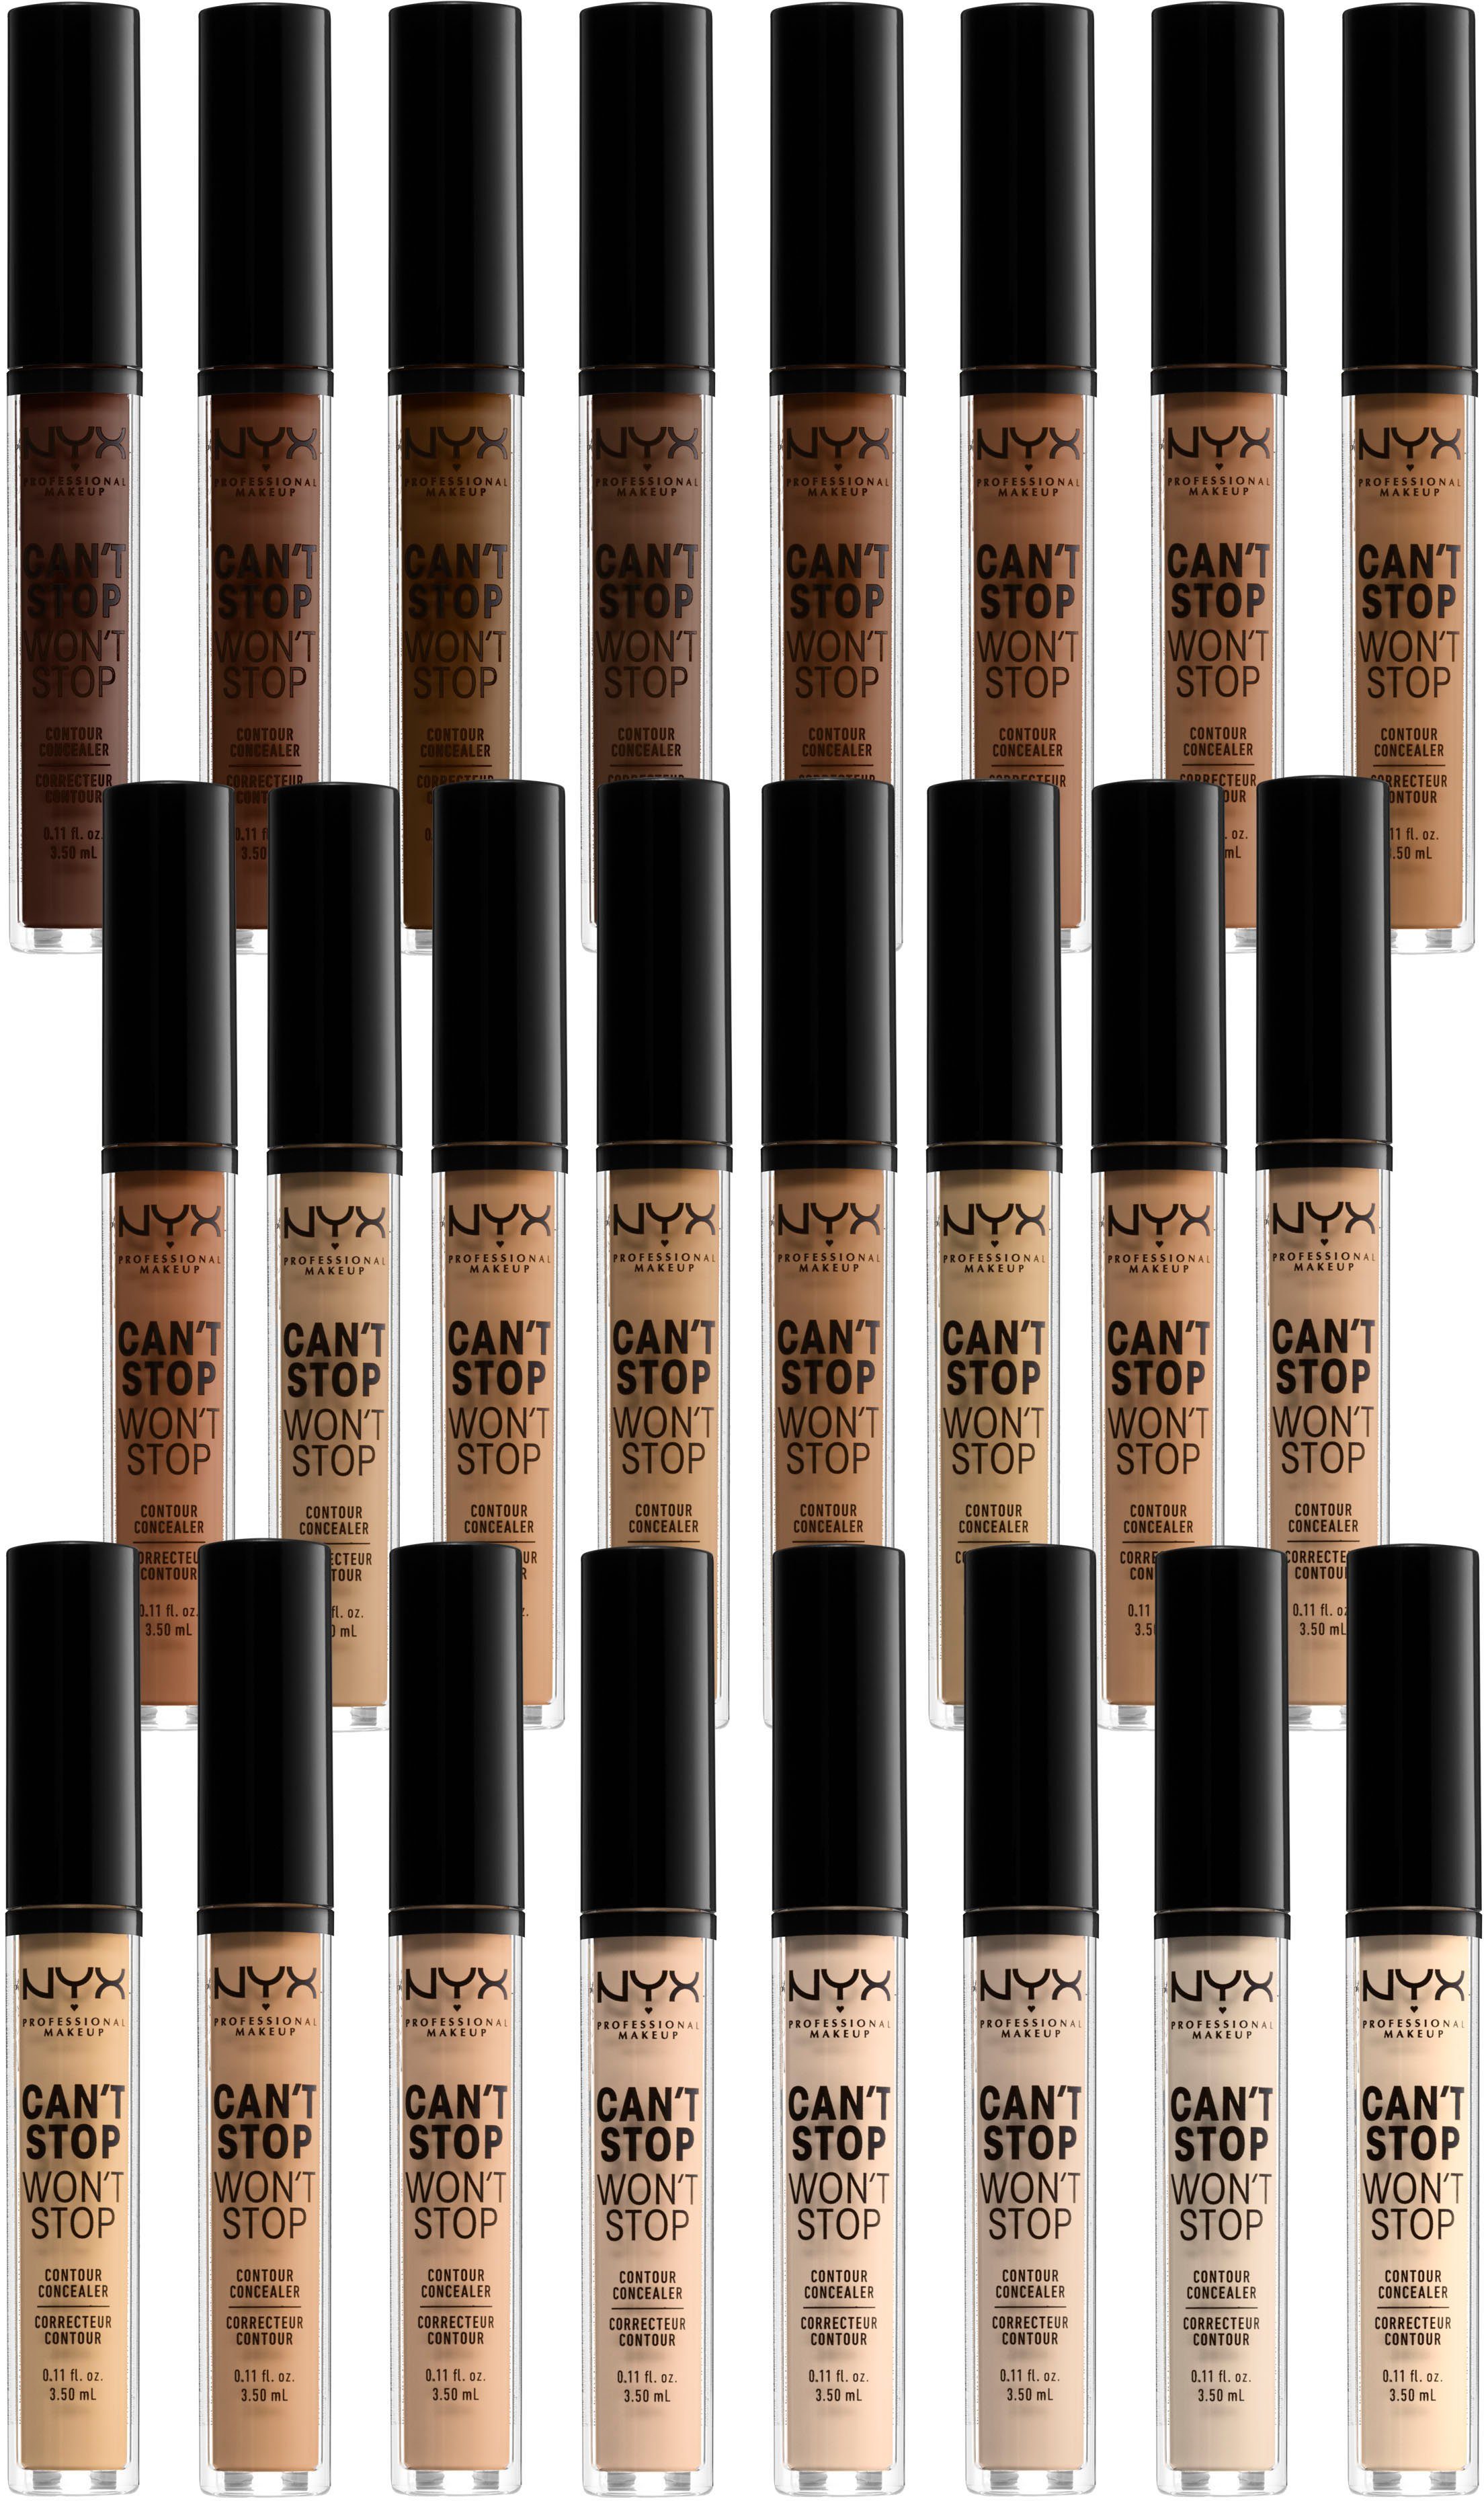 Stop Won´t Vanilla Stop NYX Can´t Professional Makeup Concealer NYX Concealer CSWSC06